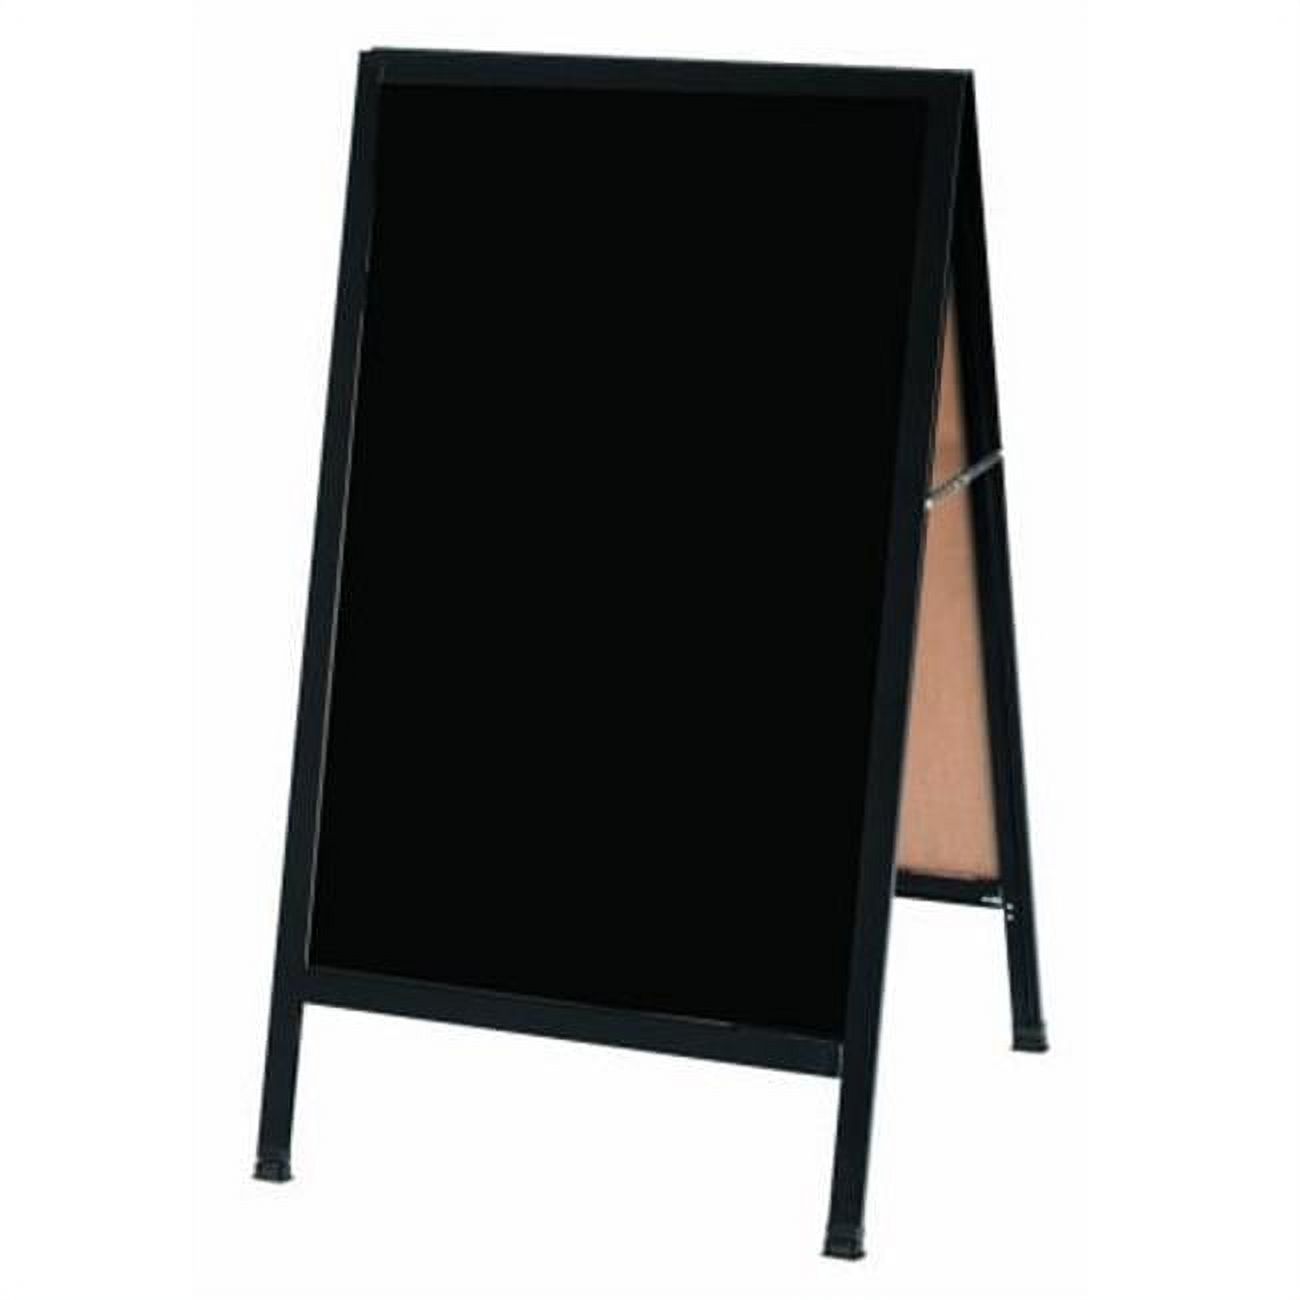 Aarco Products  Inc. BA-5SB A-Frame Sidewalk Board Features a Black Porcelain Markerboard and a Black Aluminum Frame. Size 42 in.Hx24 in.W - image 1 of 1